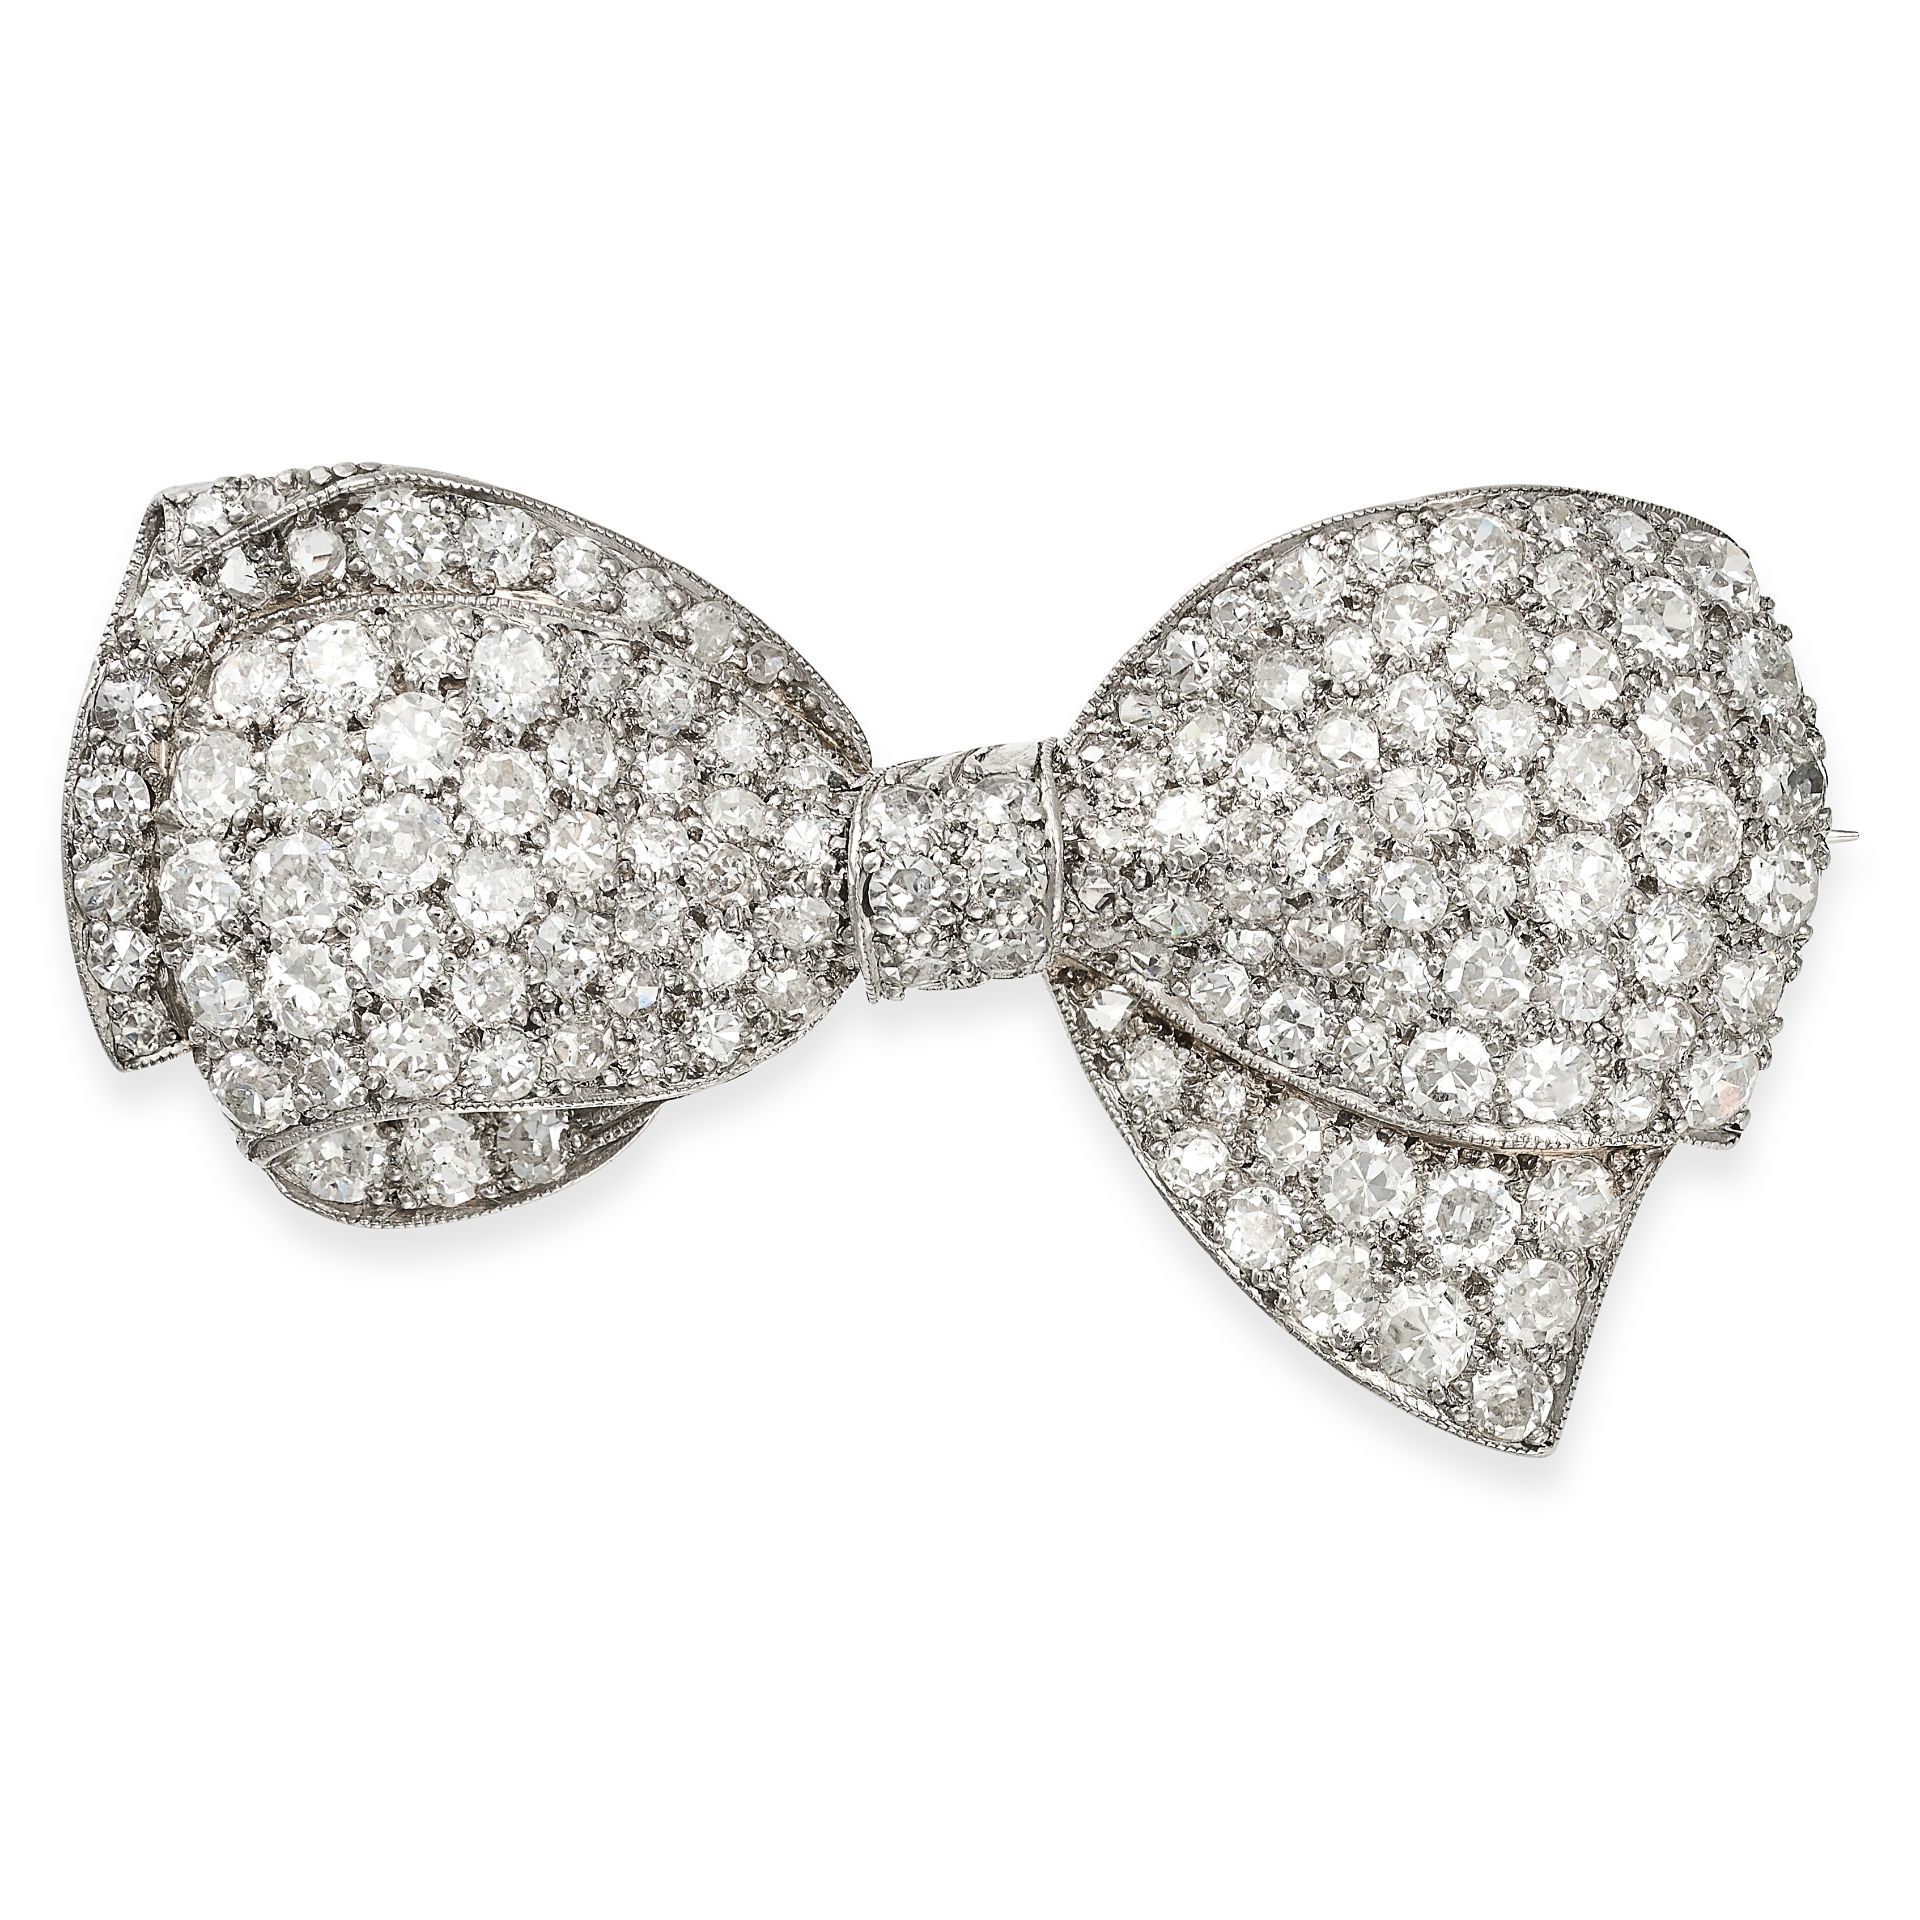 A VINTAGE DIAMOND BOW BROOCH in platinum, designed as a ribbon tied into a bow, set with old cut,